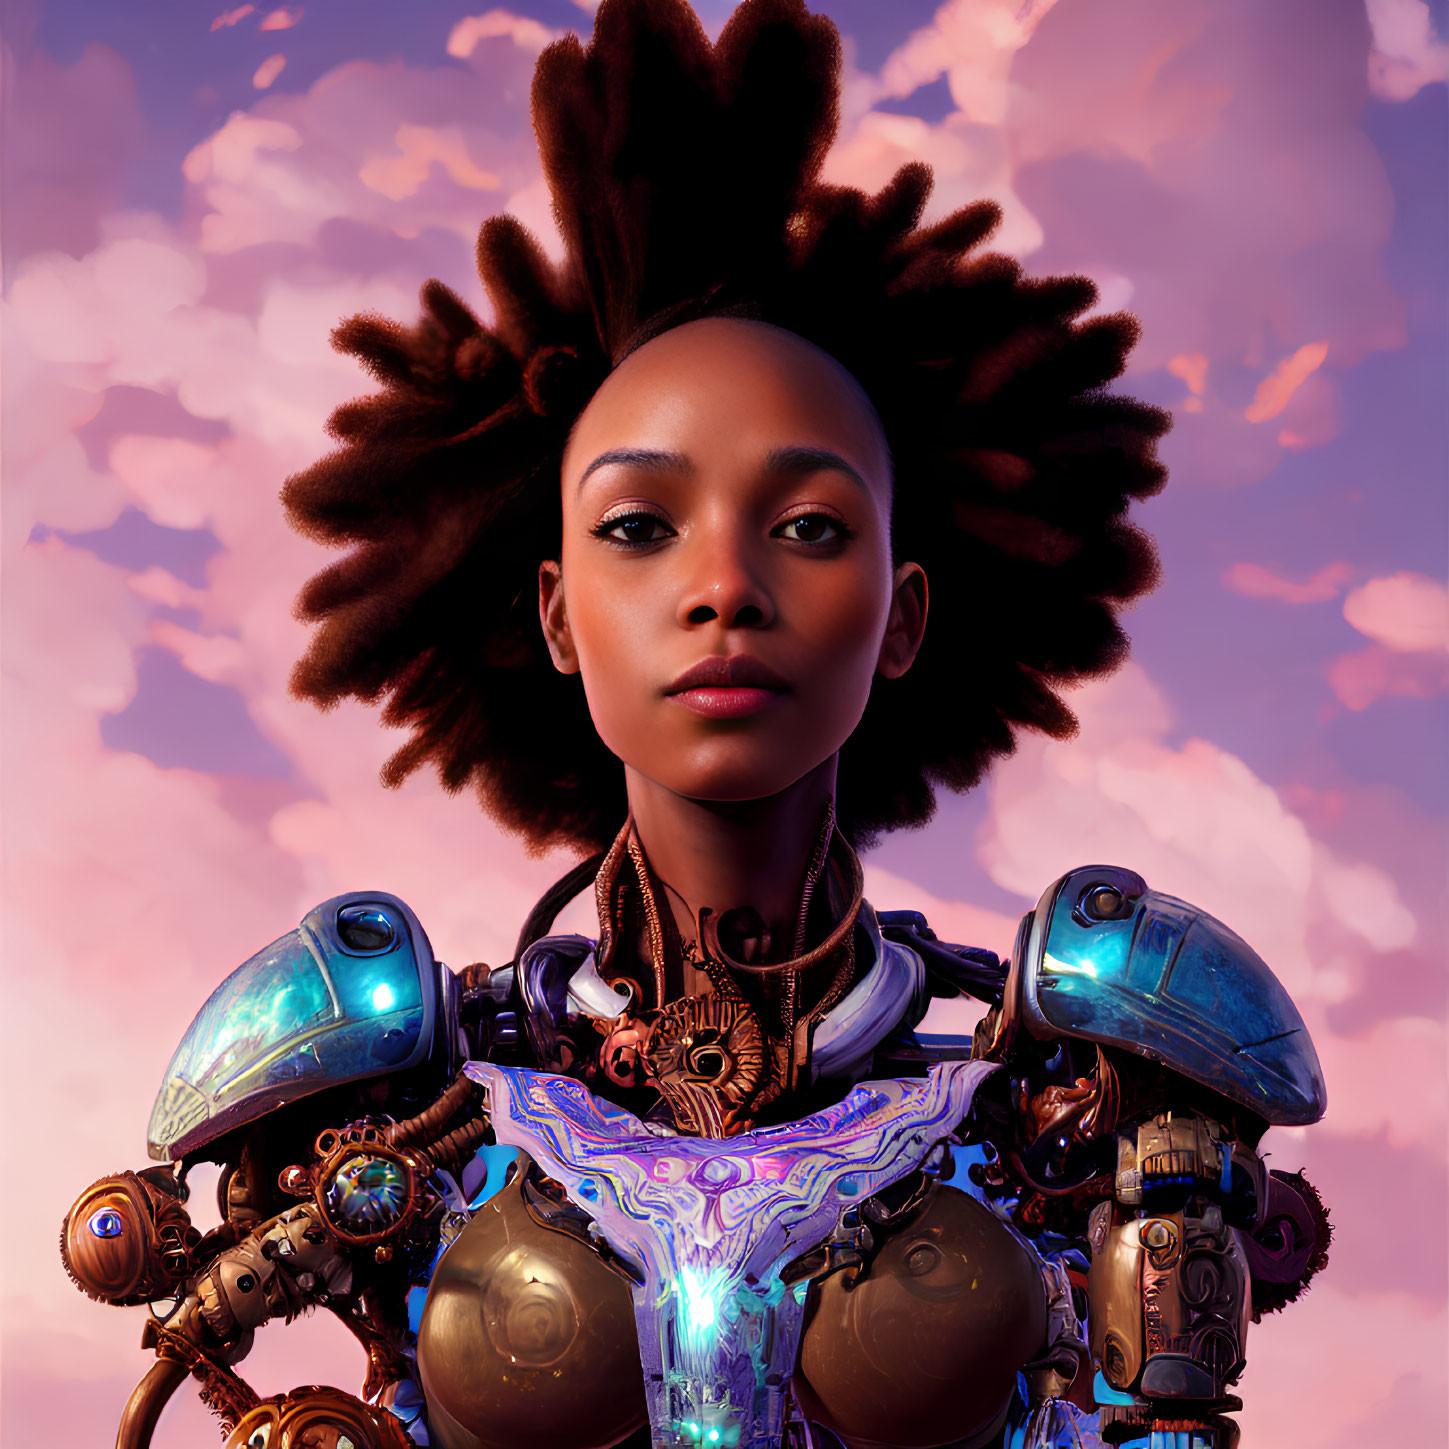 Portrait of Young Woman with Afro Merging with Robotic Body in Futuristic Setting